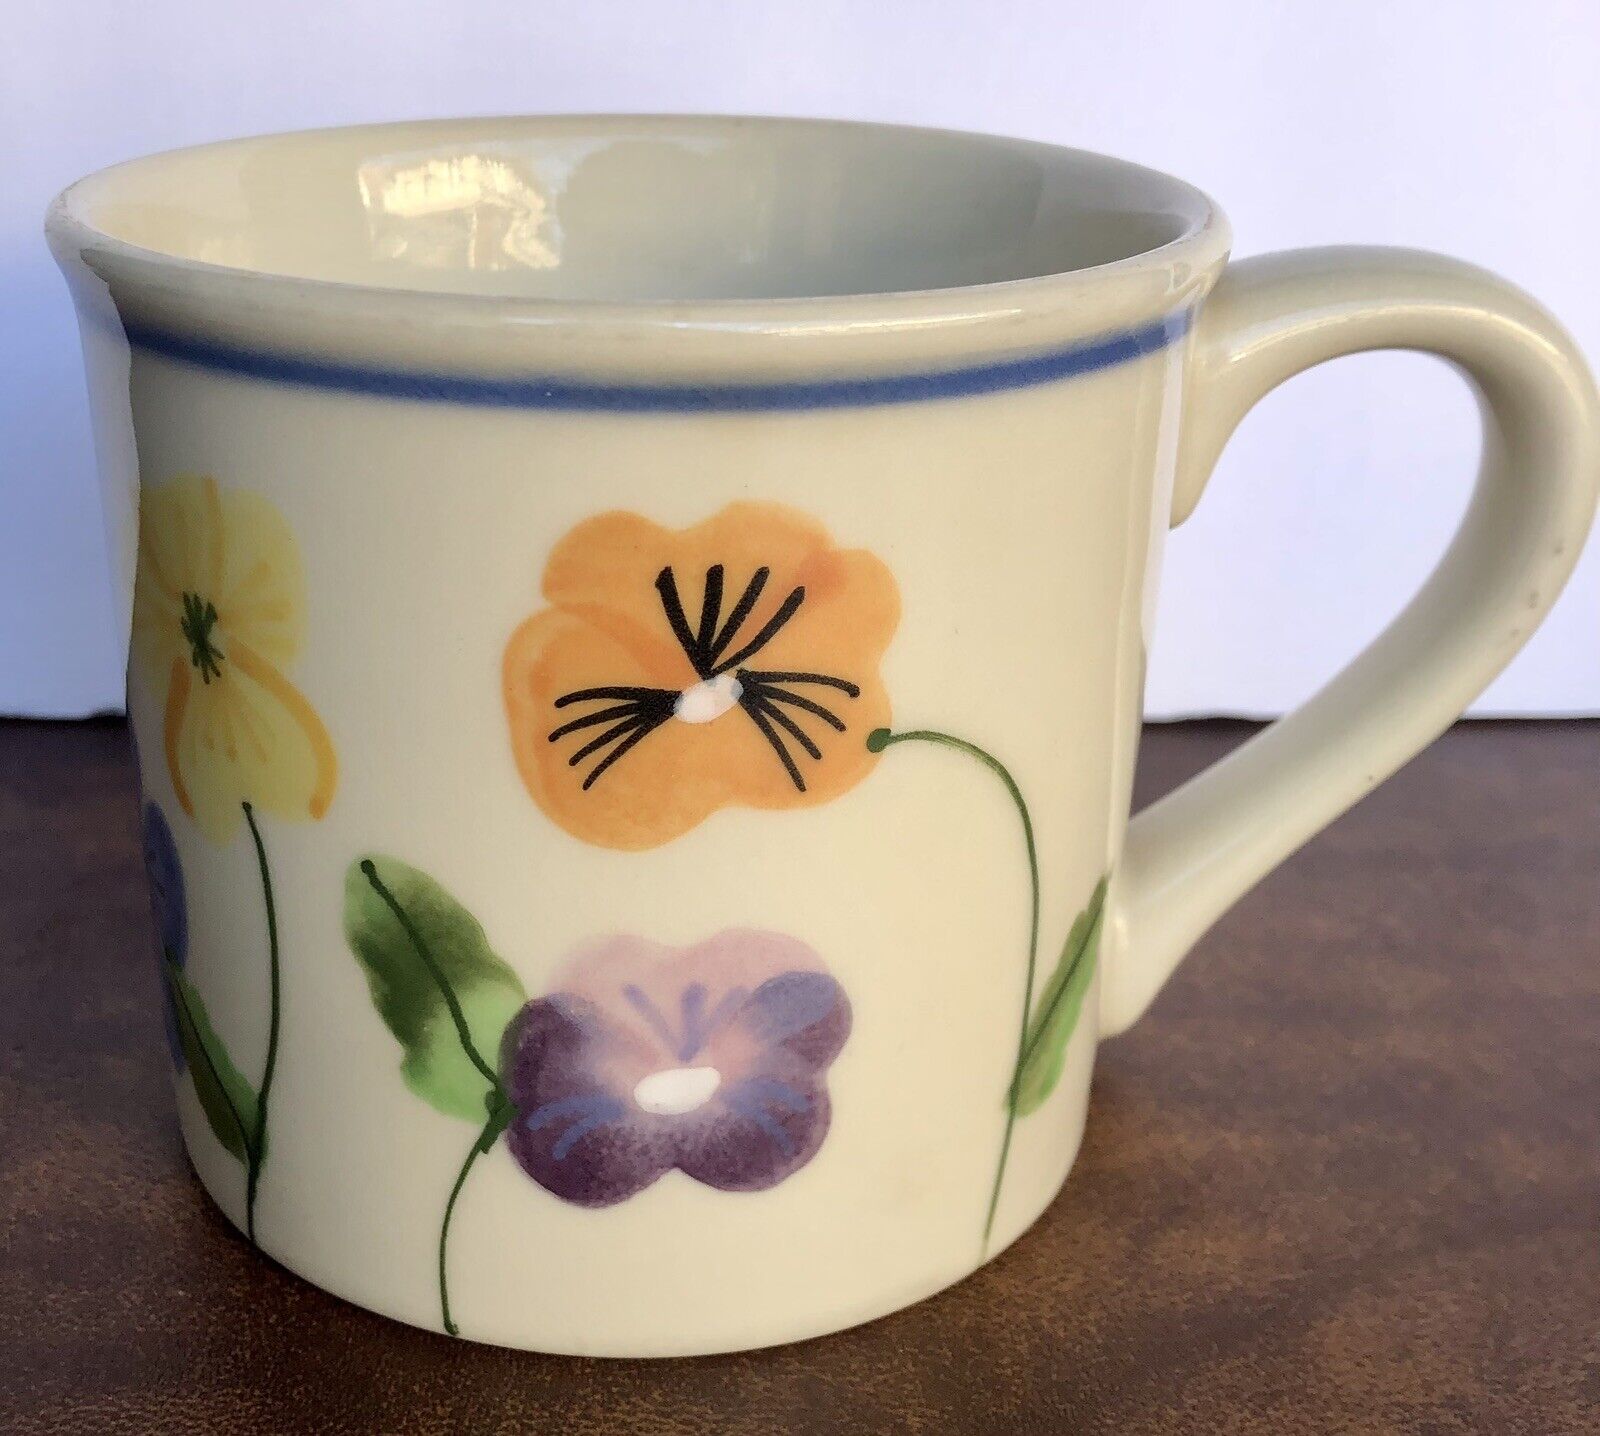 Vtg. Starbucks Barista Collection Mug by Hartstone Pottery Hand Painted Flower